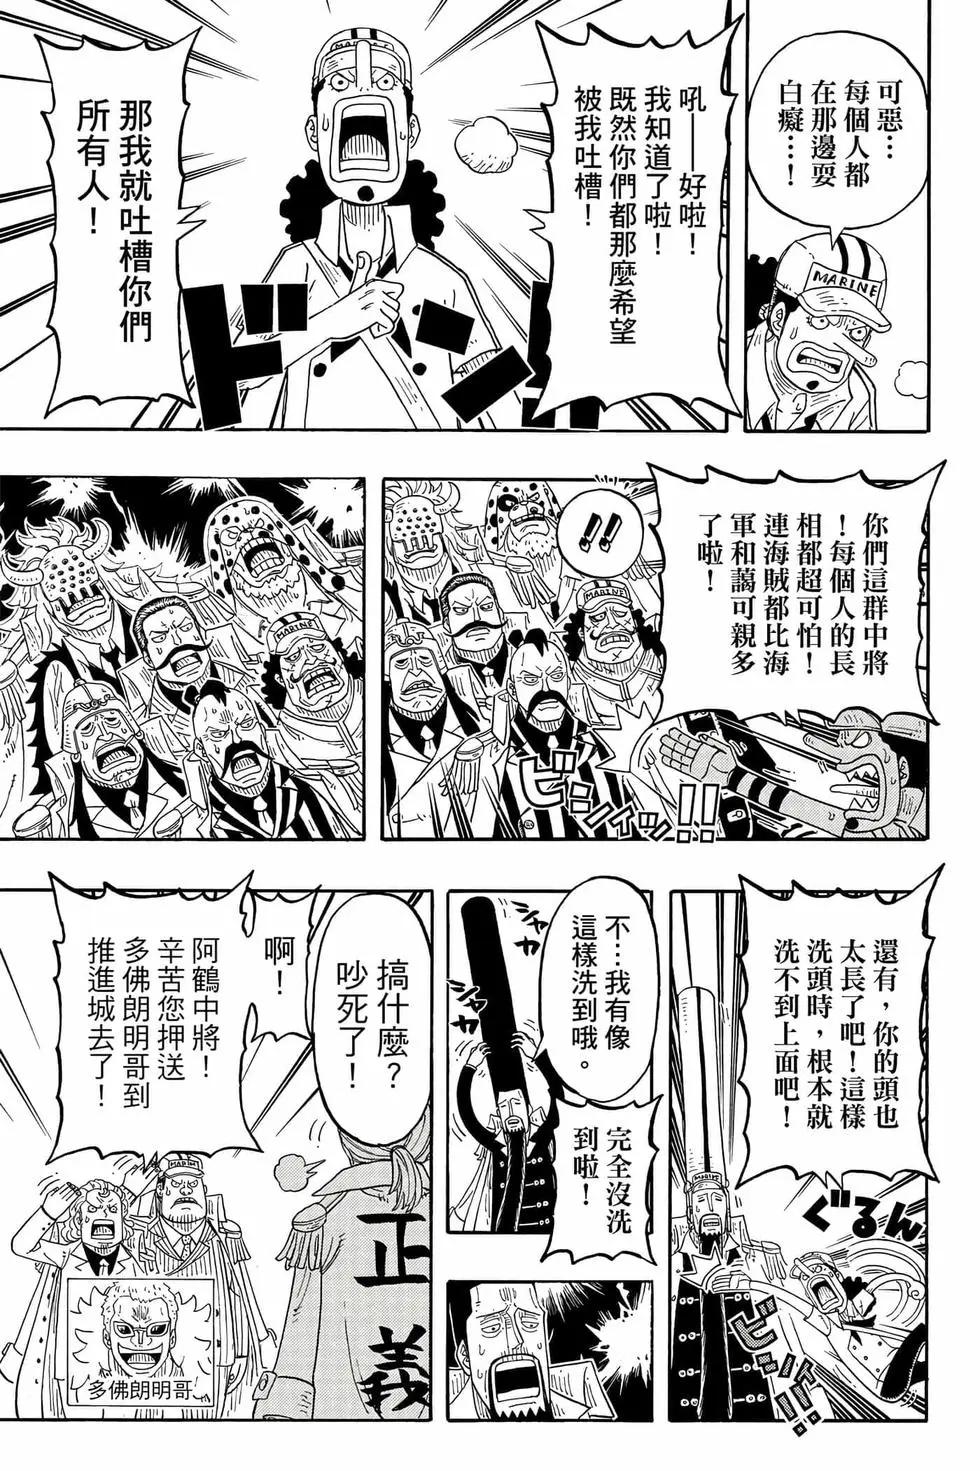 One piece party - 第04卷(1/4) - 4